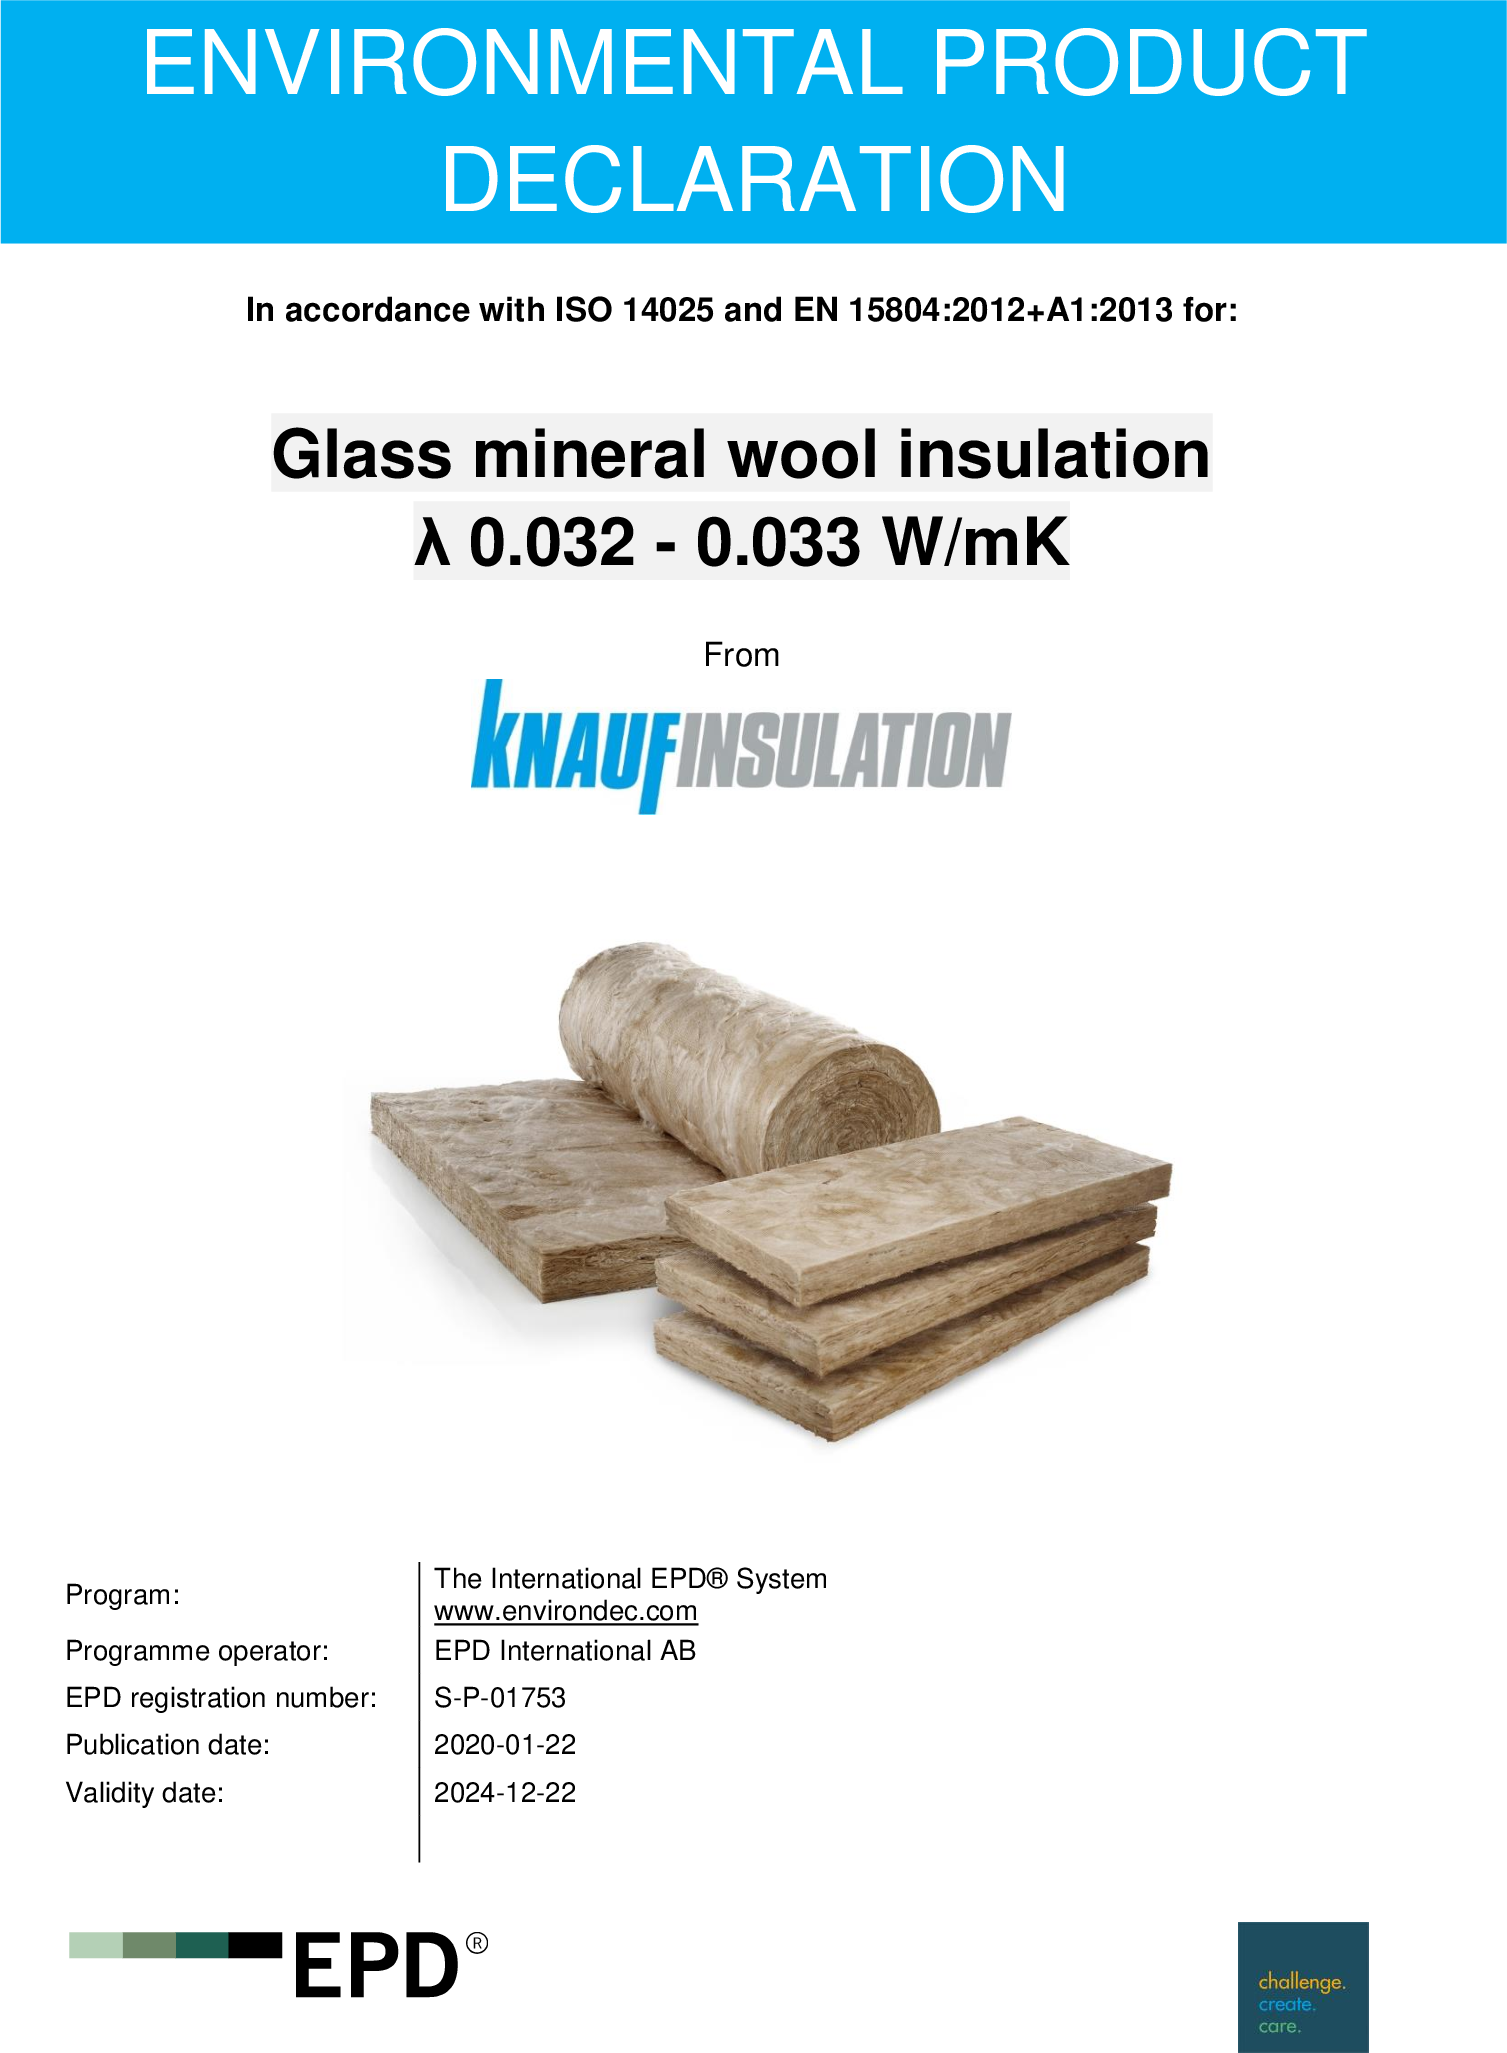 Environment Product Declaration (EPD) - Glass Mineral Wool 0.032 - 0.033 W/mK